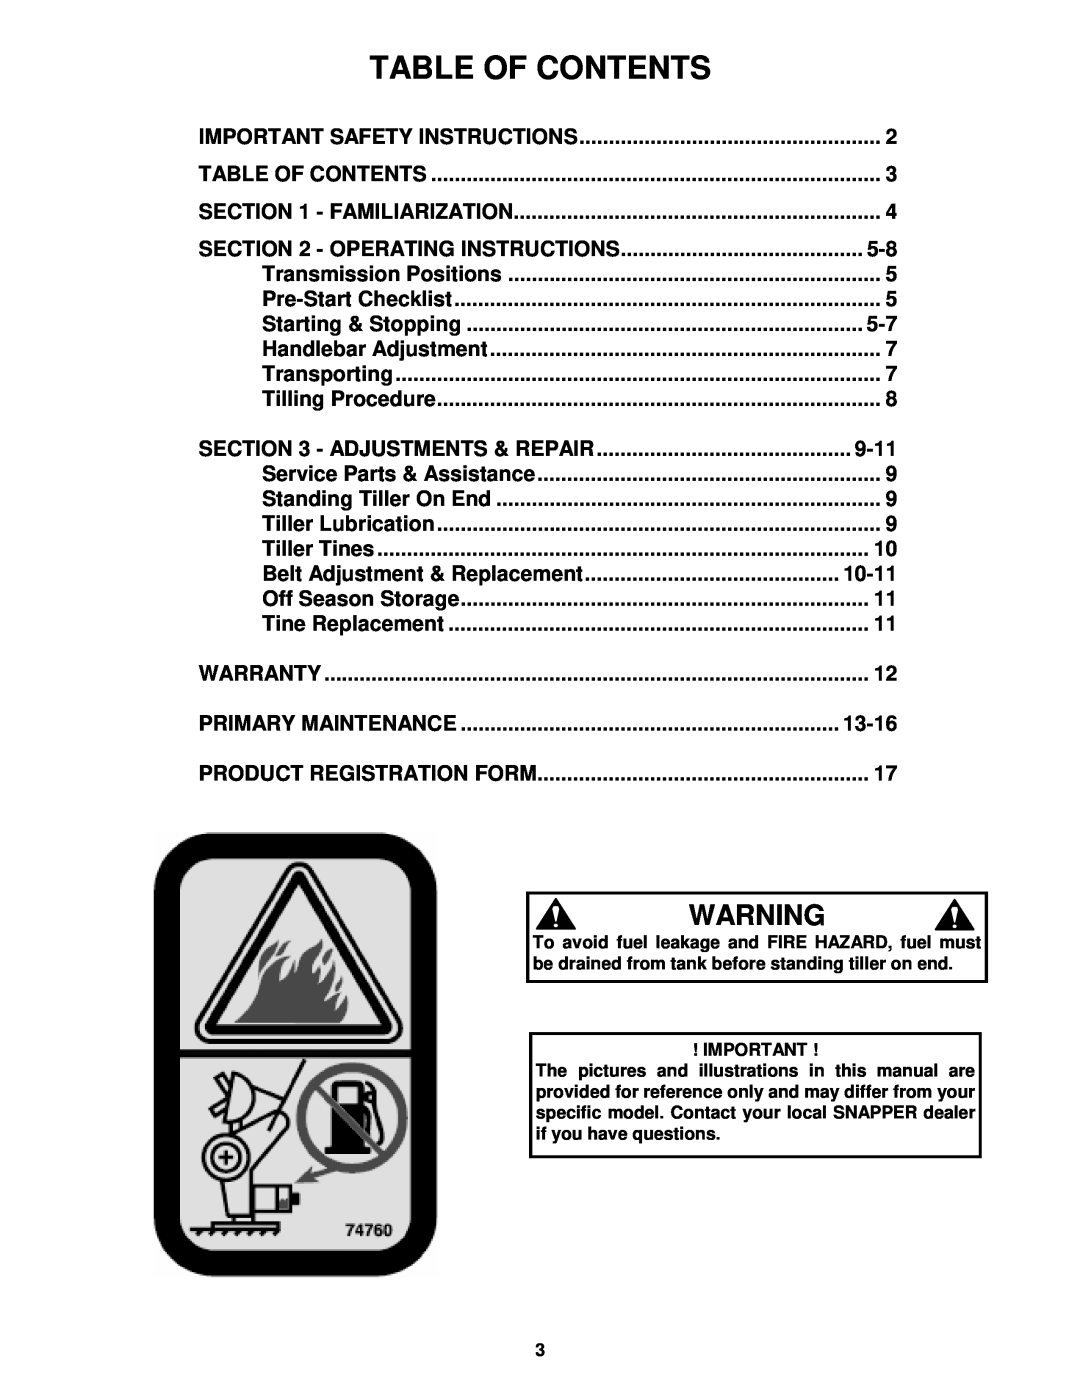 Snapper ICFR7005BV, CICFR5505HV important safety instructions Table Of Contents 